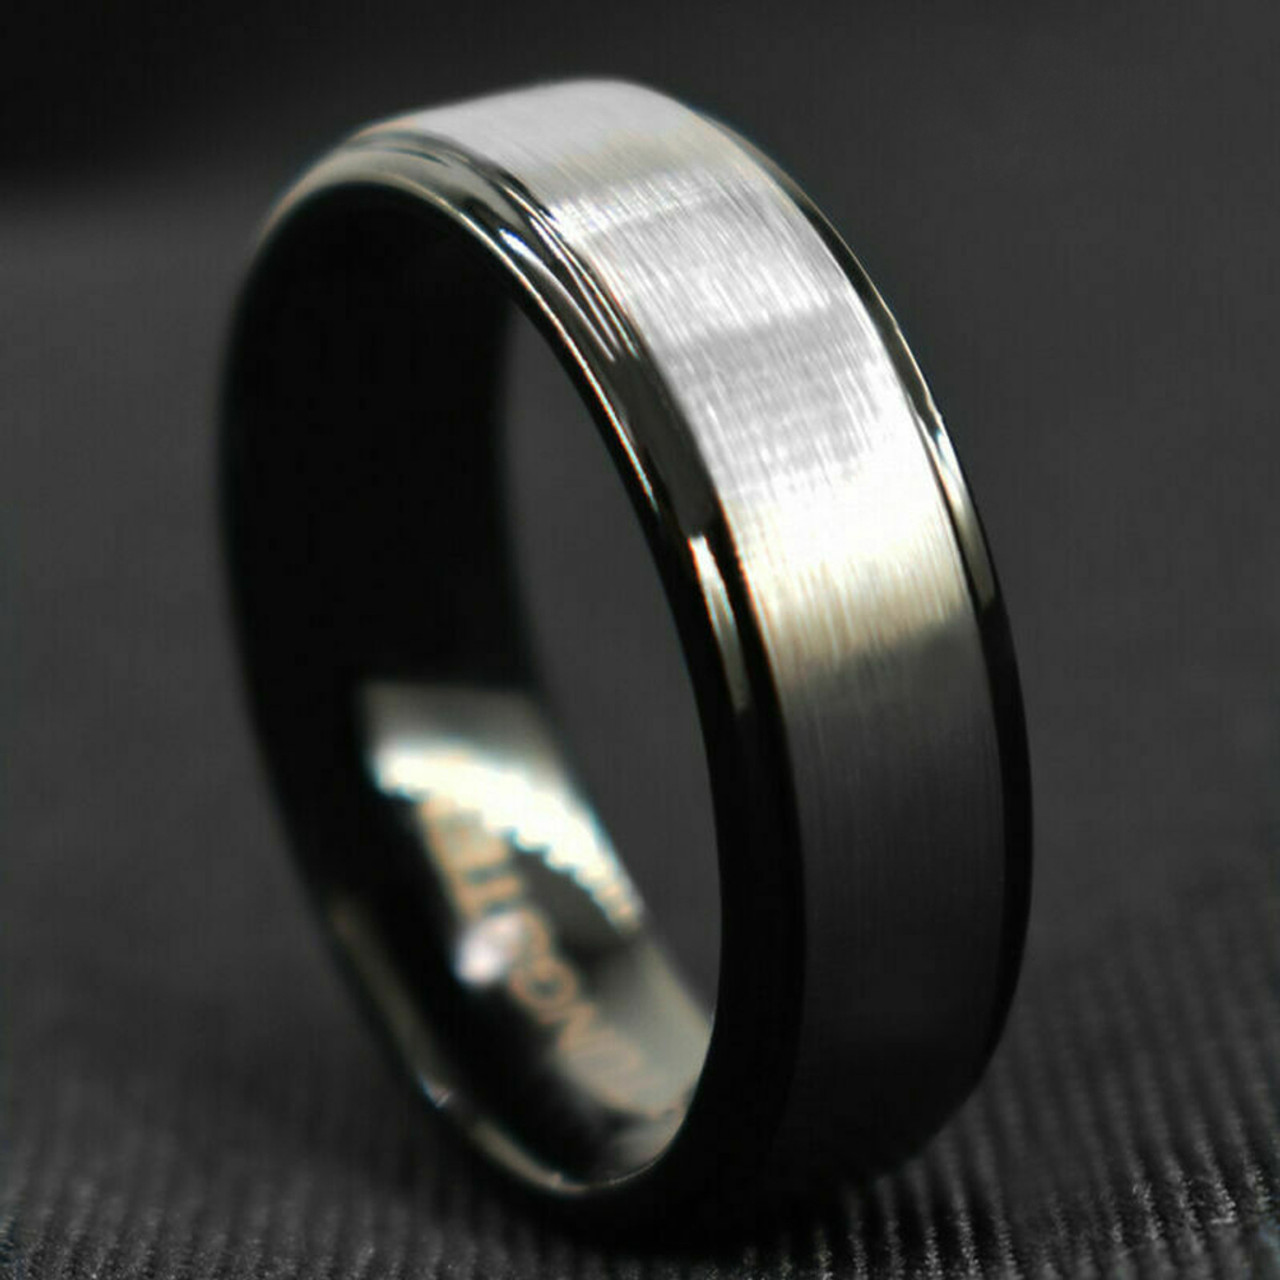 Men's Tungsten Wedding Band (8mm). Gray and Black Plated Stepped Edge Ring. Comfort Fit with Brushed Top.